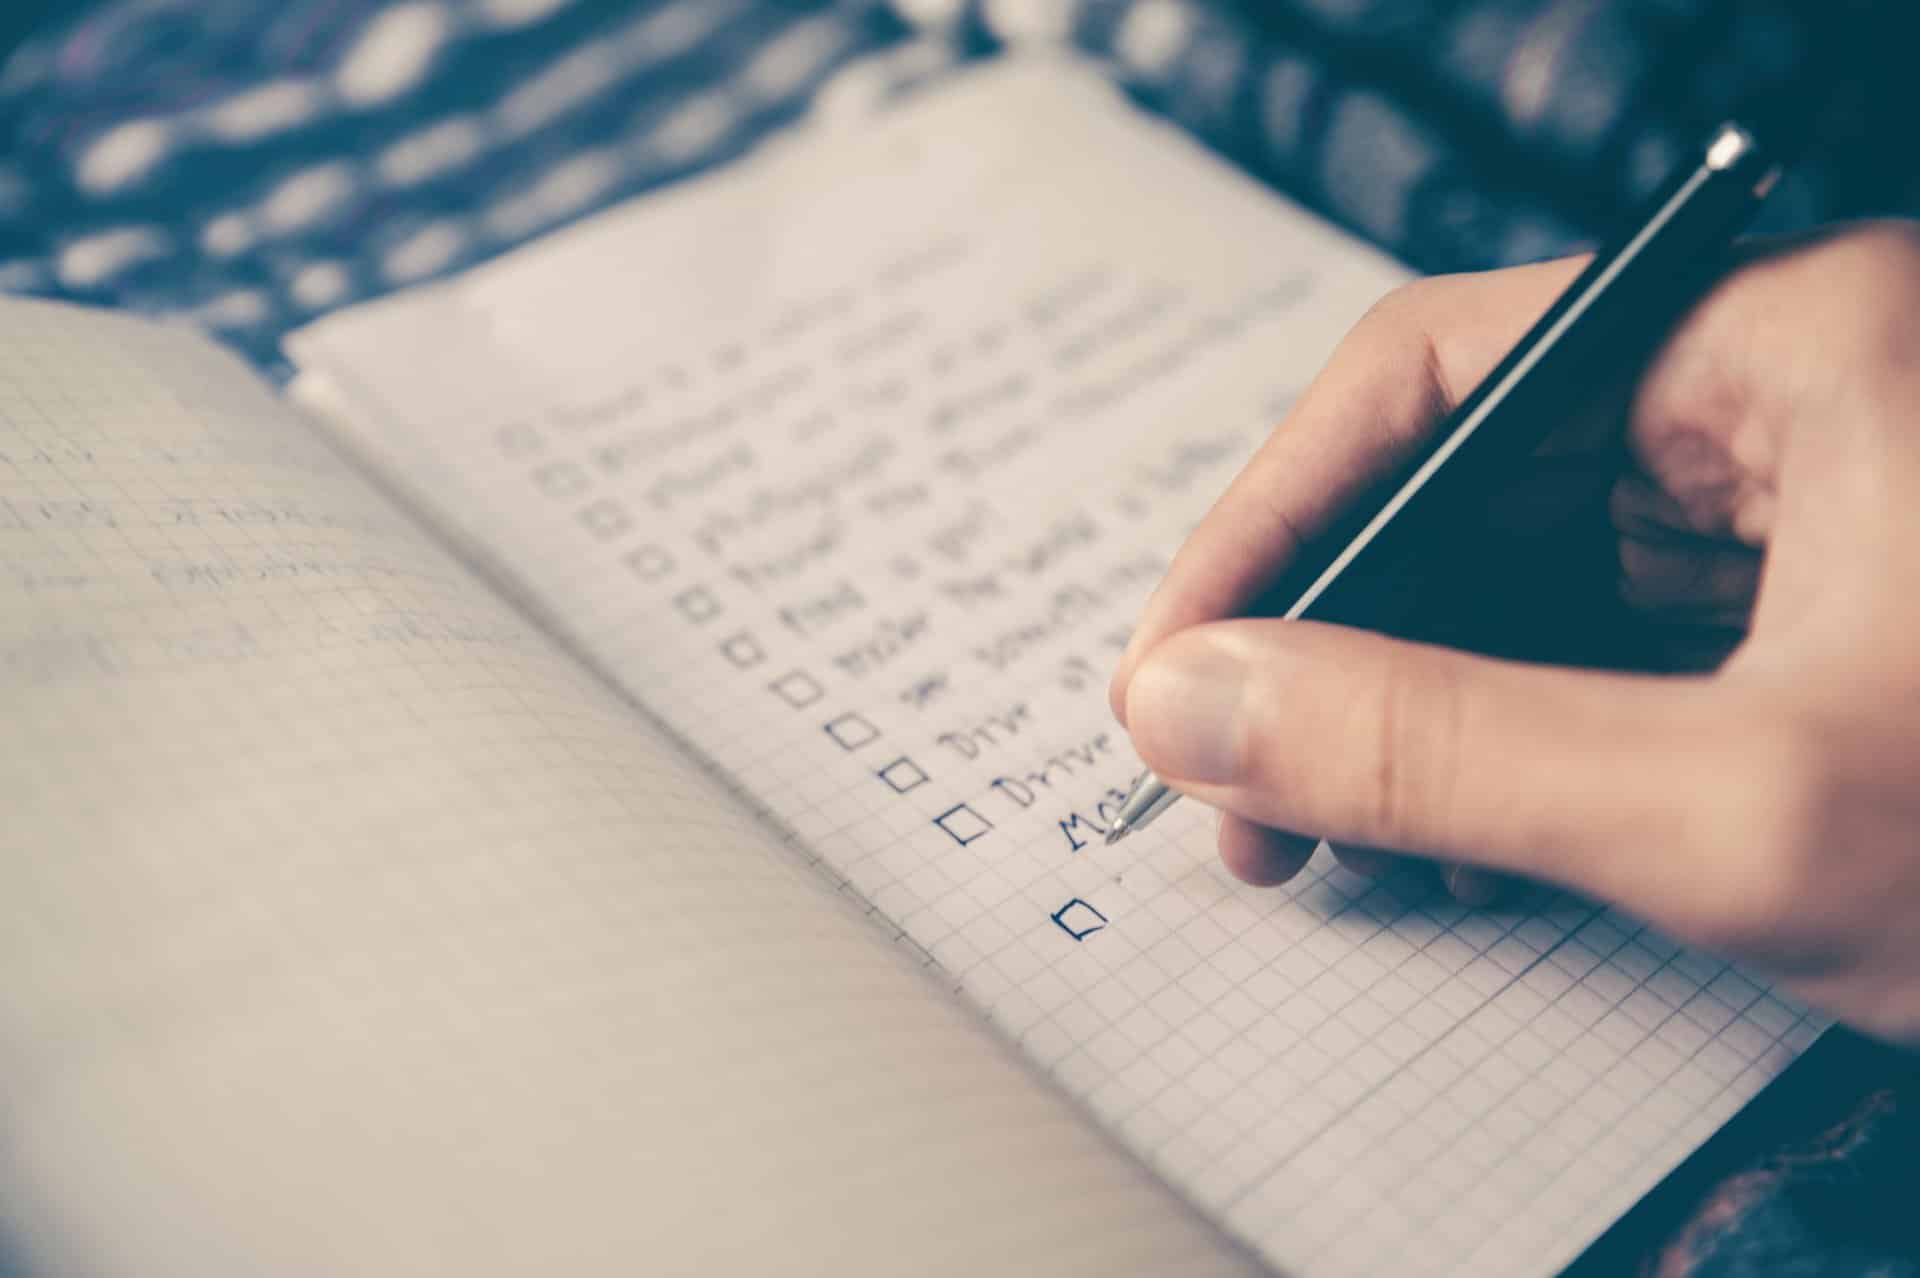 Top 11 To-Do List Apps Of 2021